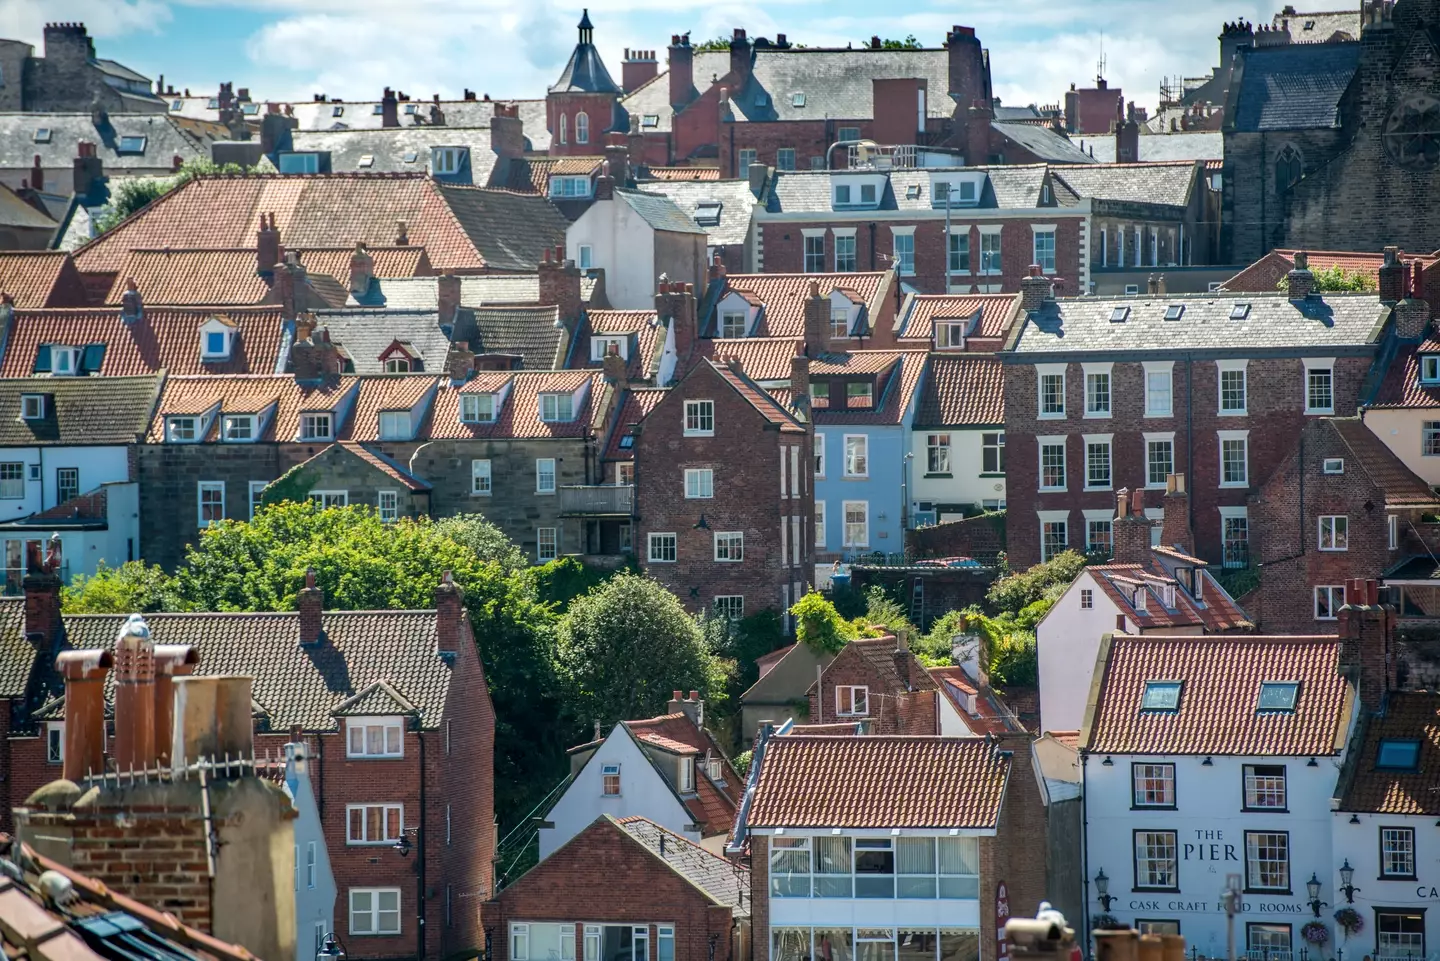 People can end up paying different council tax rates despite living in identical properties to their neighbours.